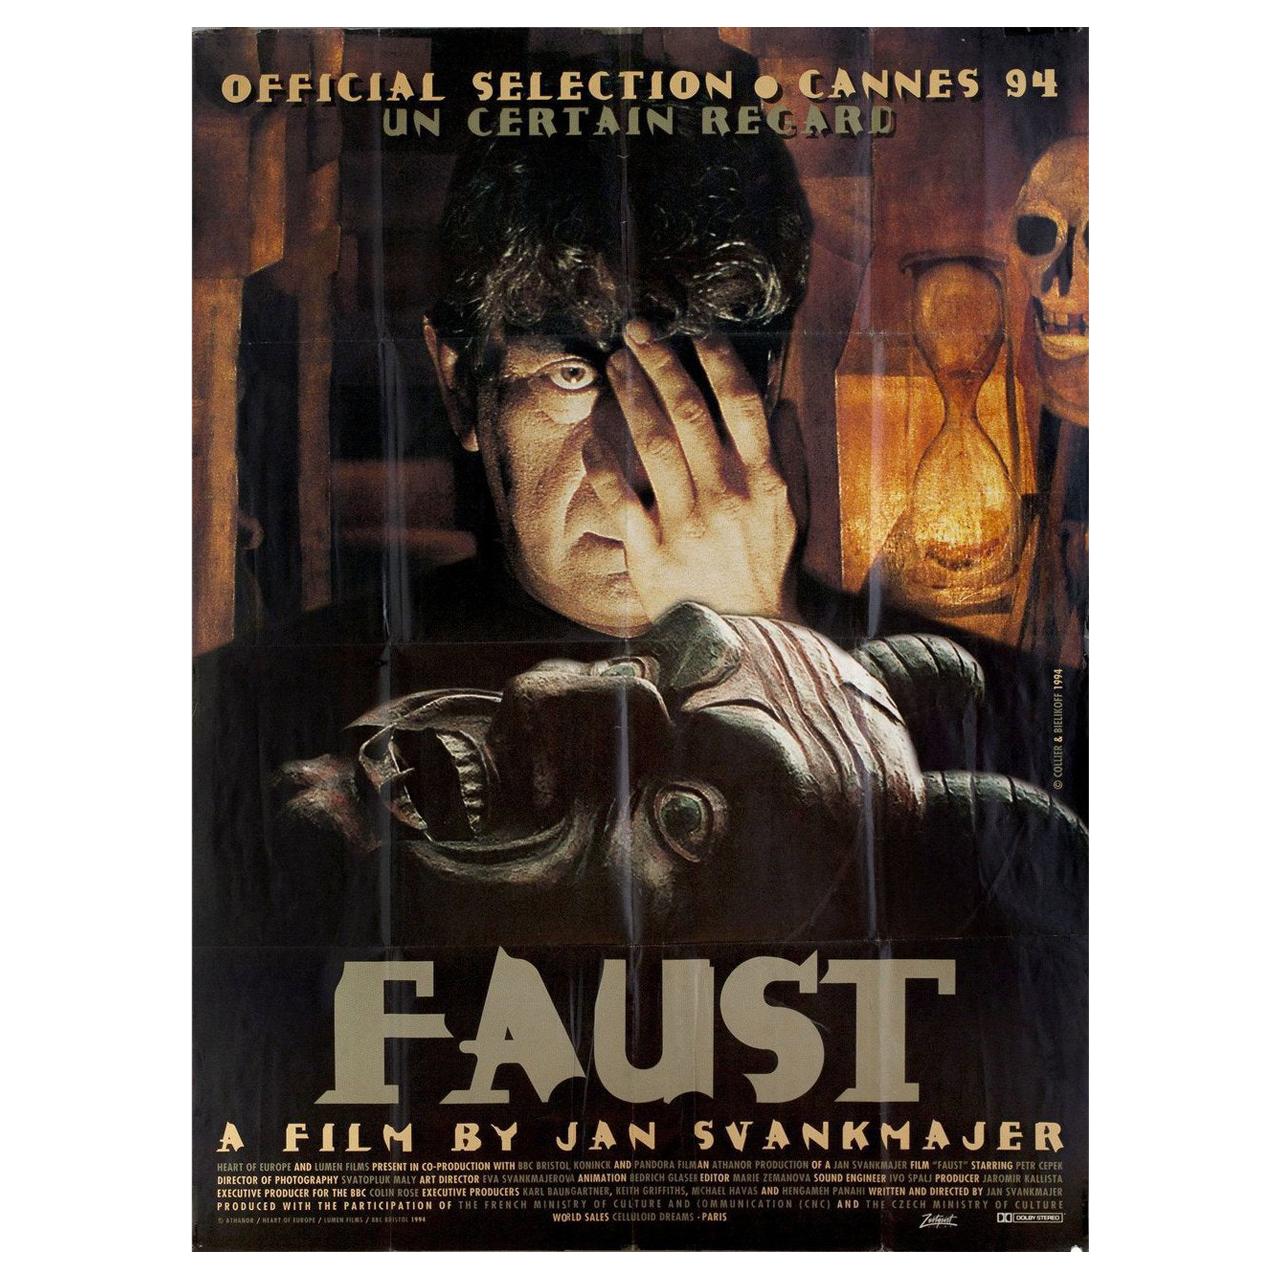 "Faust" 1994 French Grande Film Poster